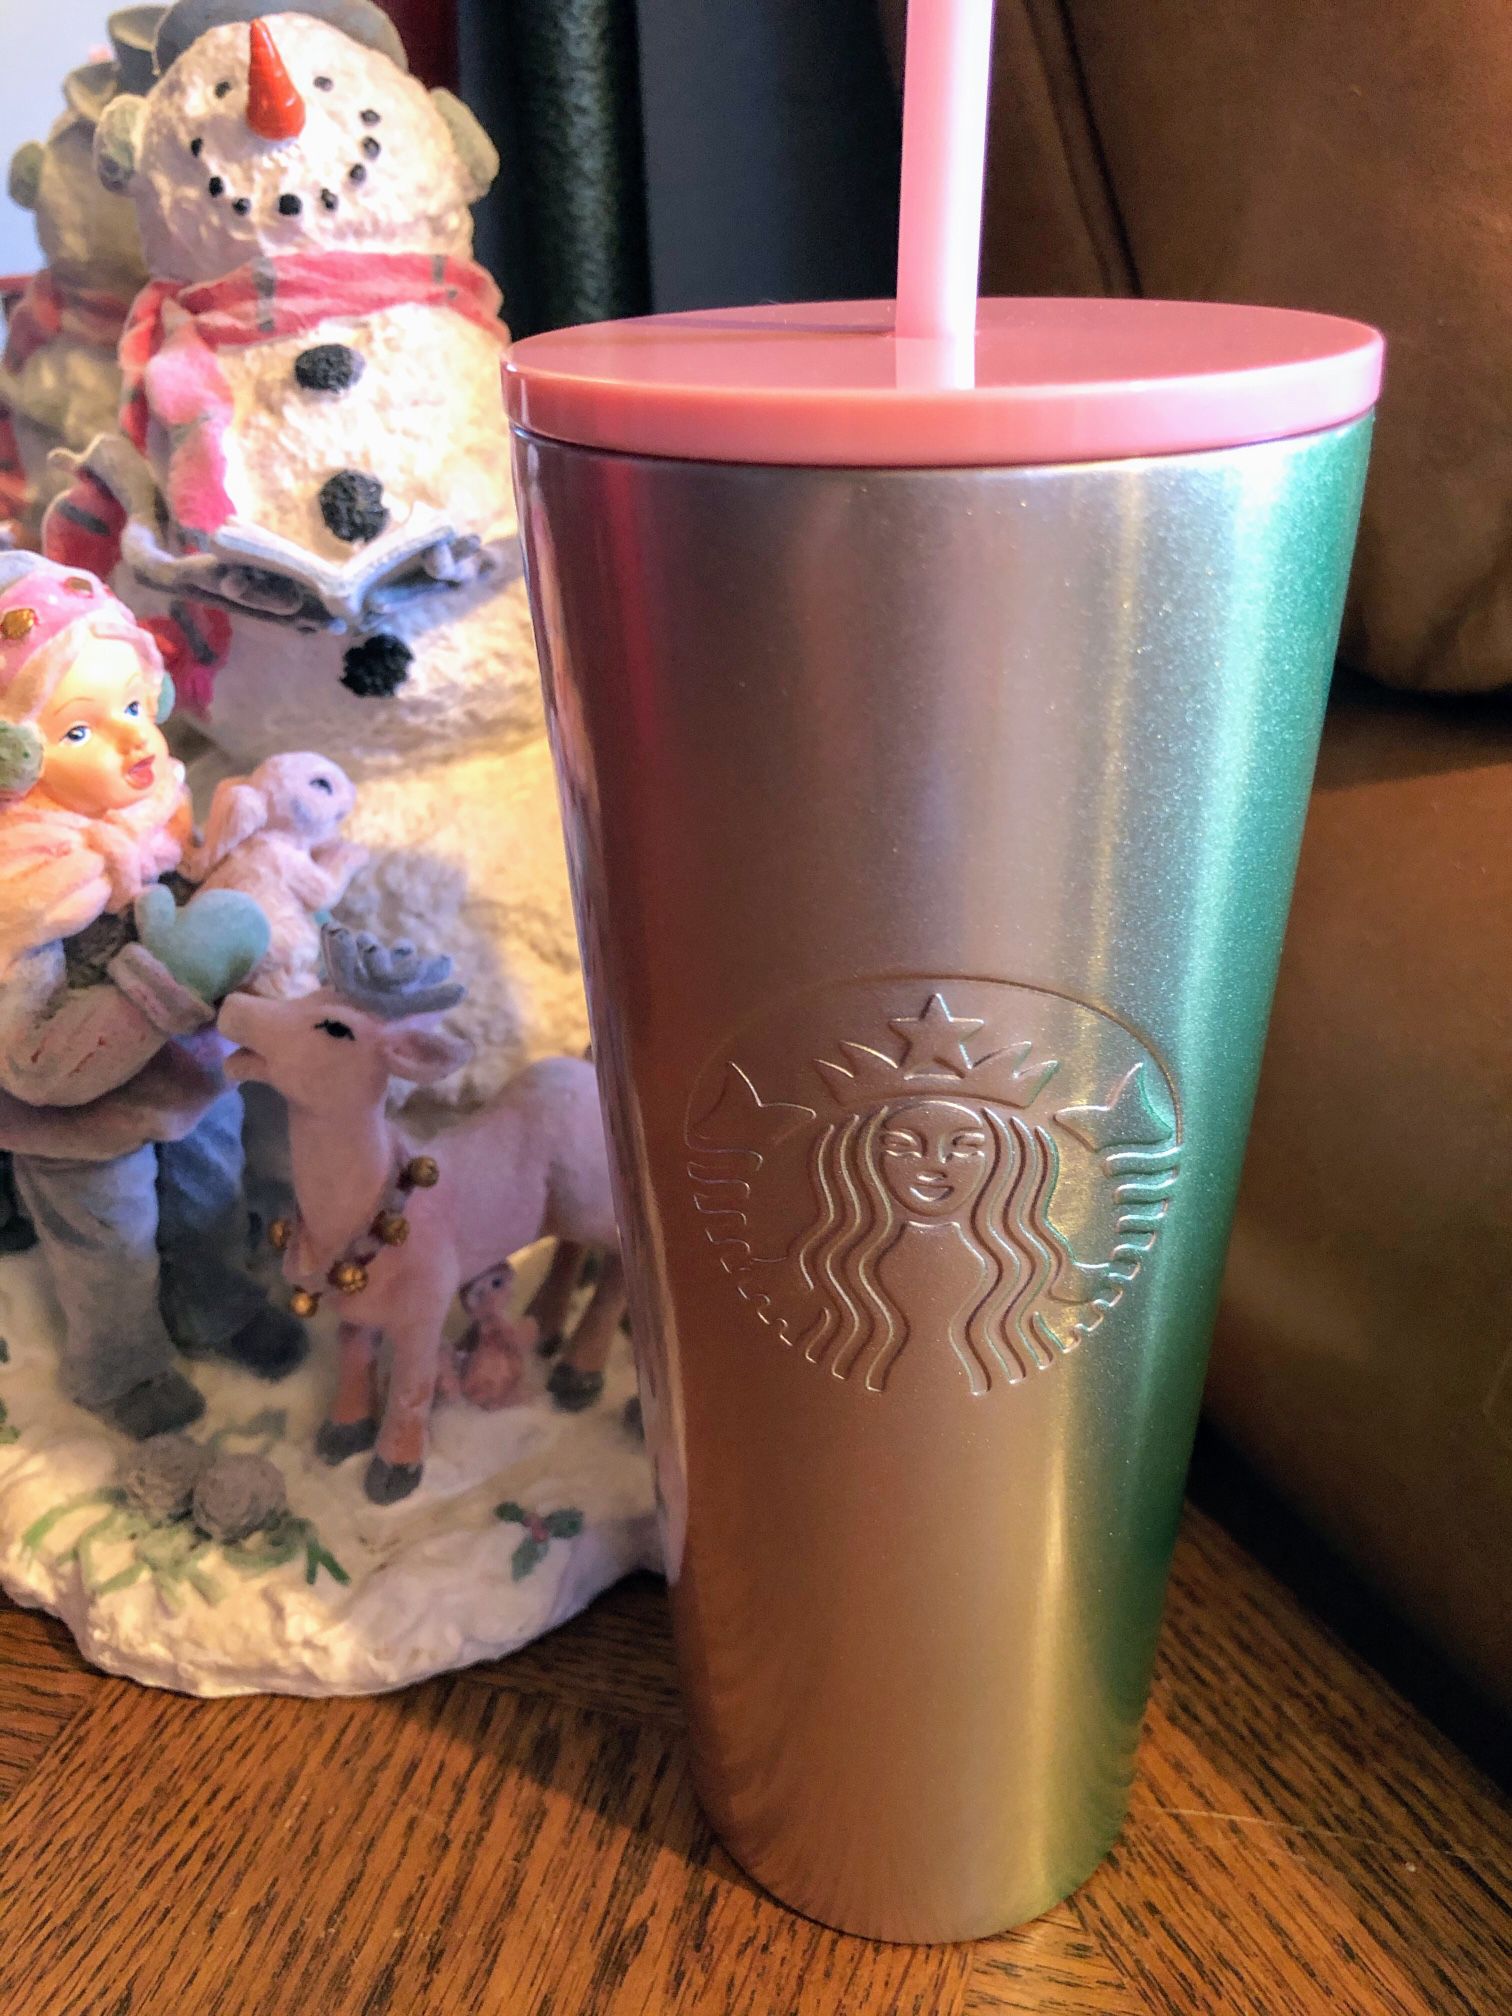 Early 5/10 Release - Starbucks Summer 2022 Stainless Tumbler Ombre Pink Orange  Cup for Sale in Queens, NY - OfferUp